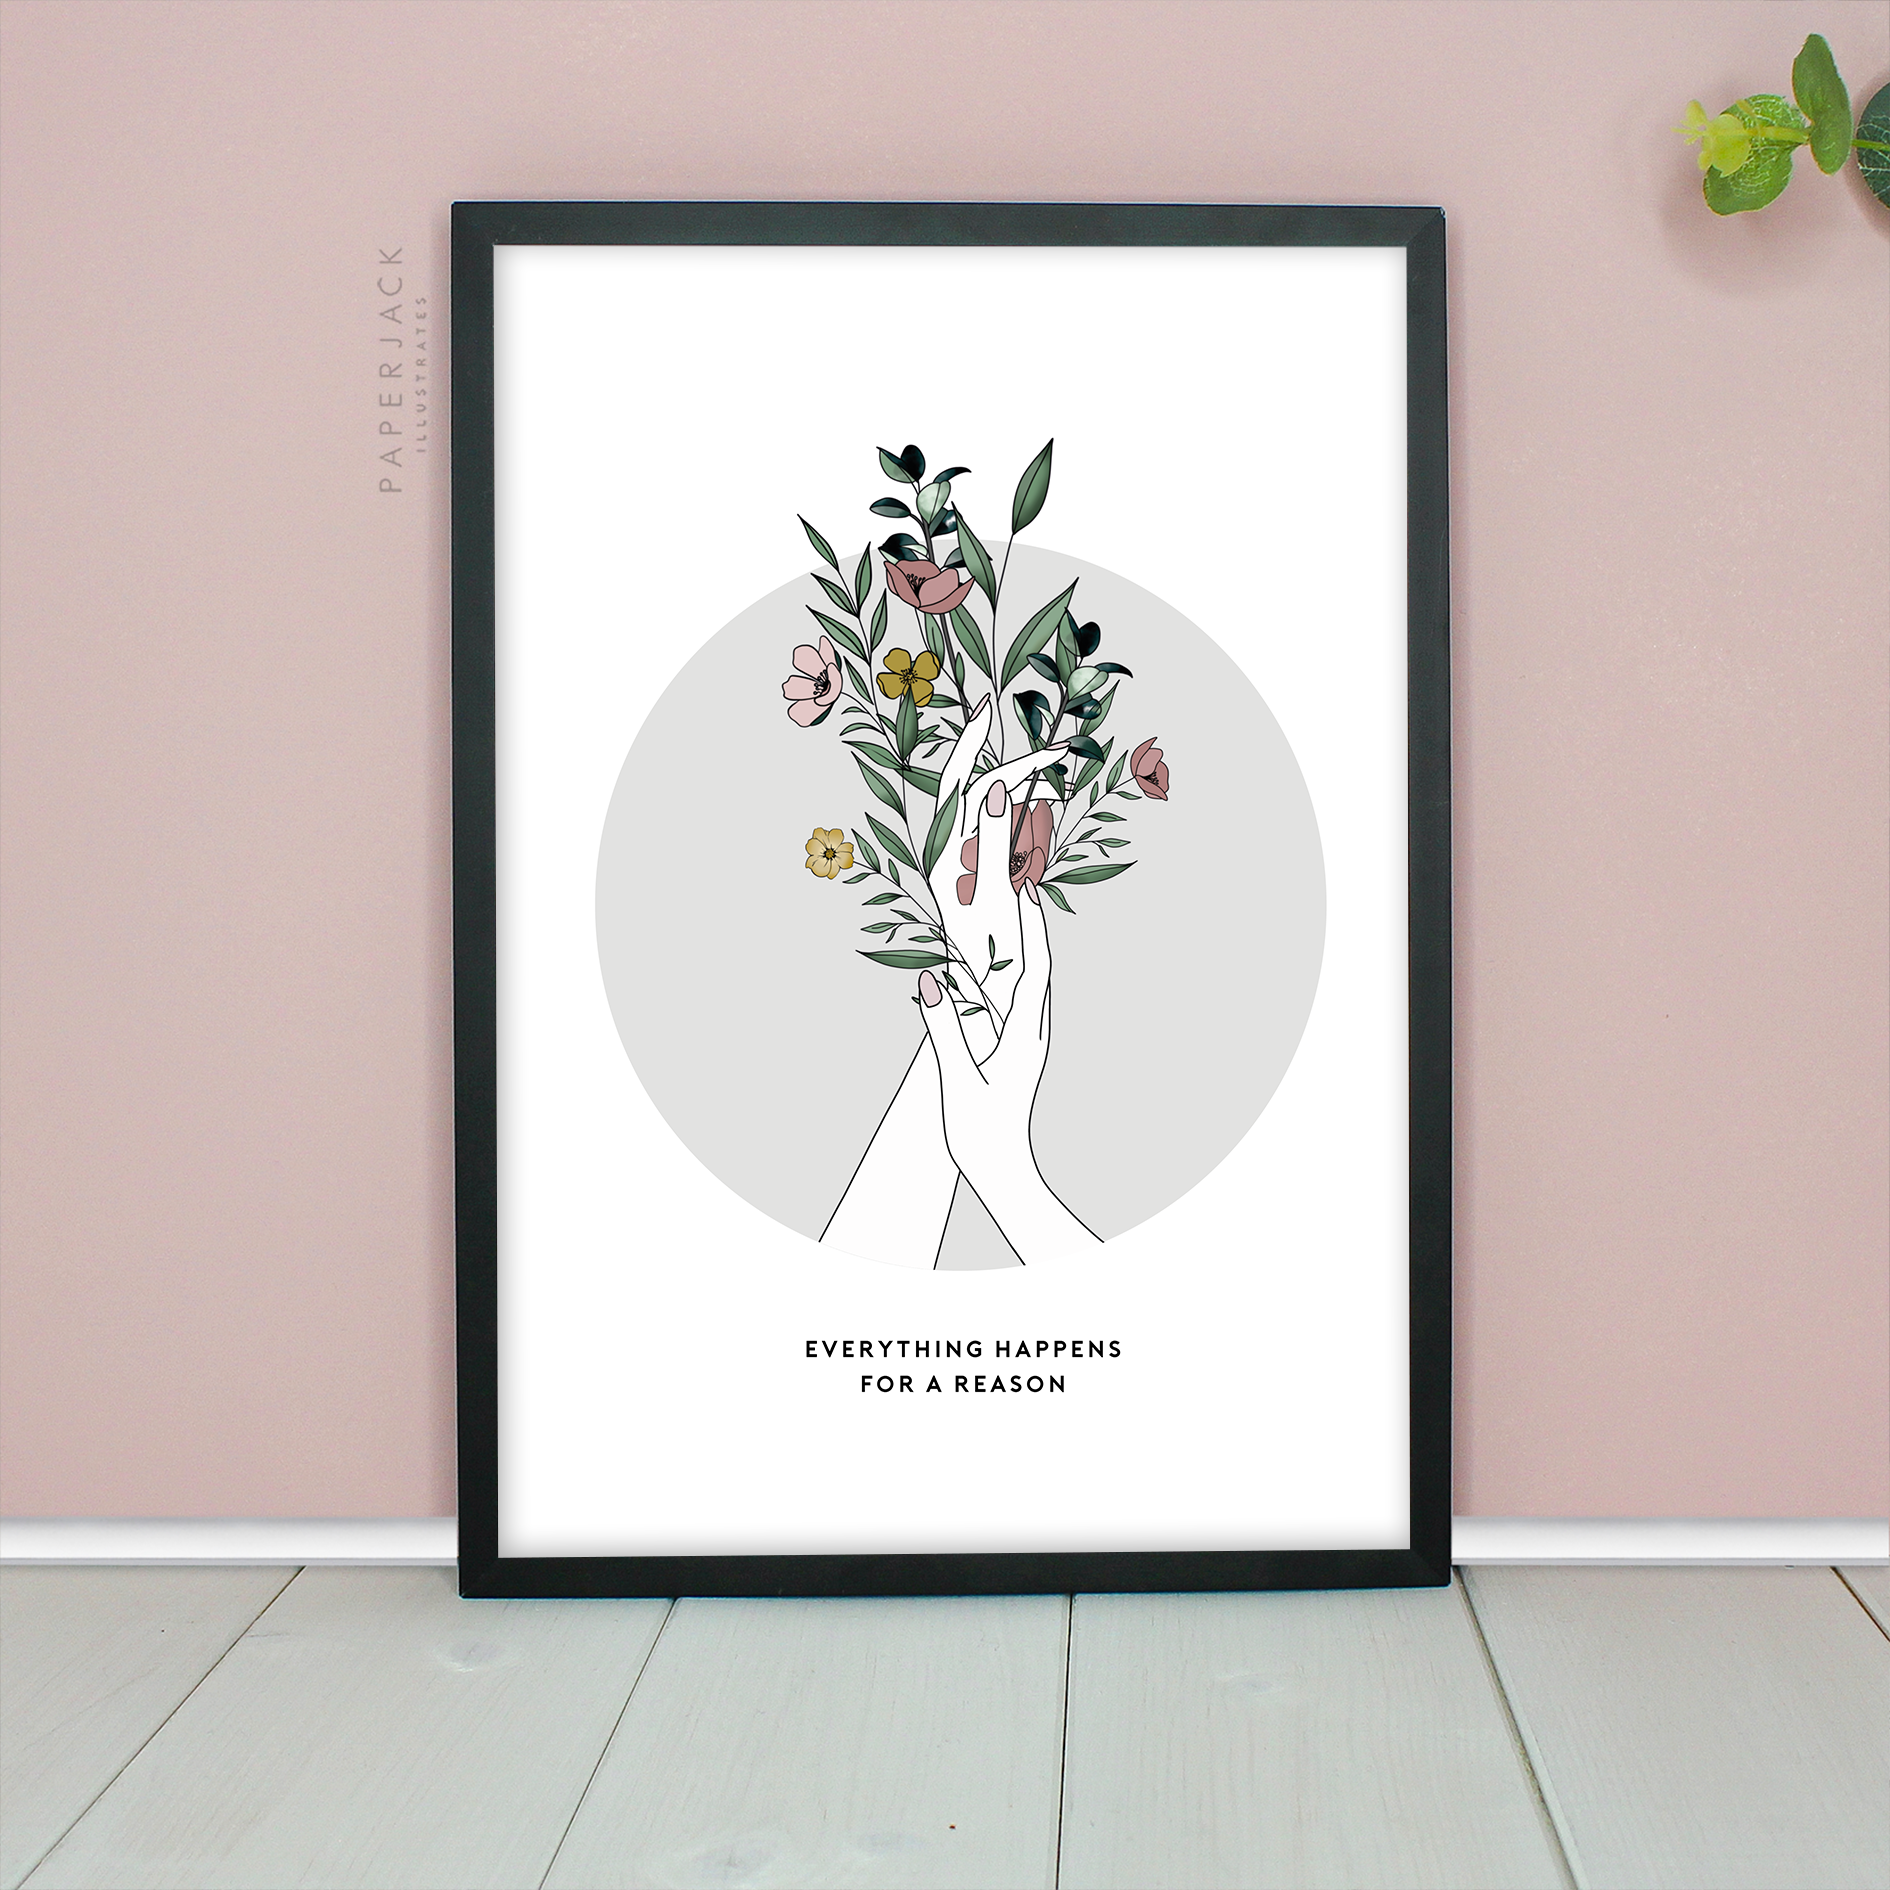 white print with grey circle and illustration of hands and flowers growing out of it - quote everything happens for a reason. Designed by PaperJack Illustrates